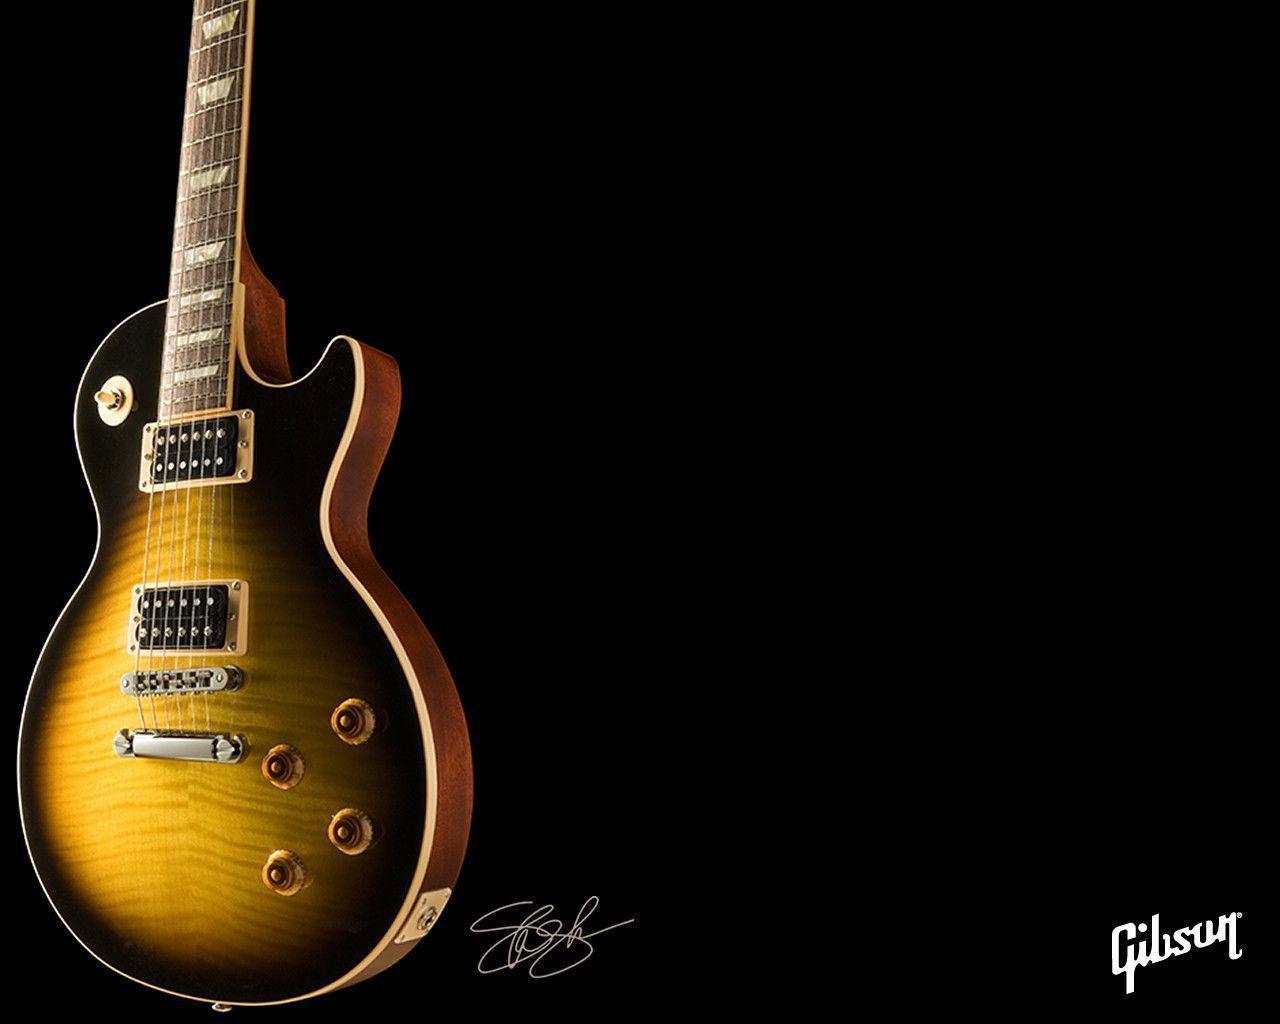 Gibson Wallpaper Free Gibson Background